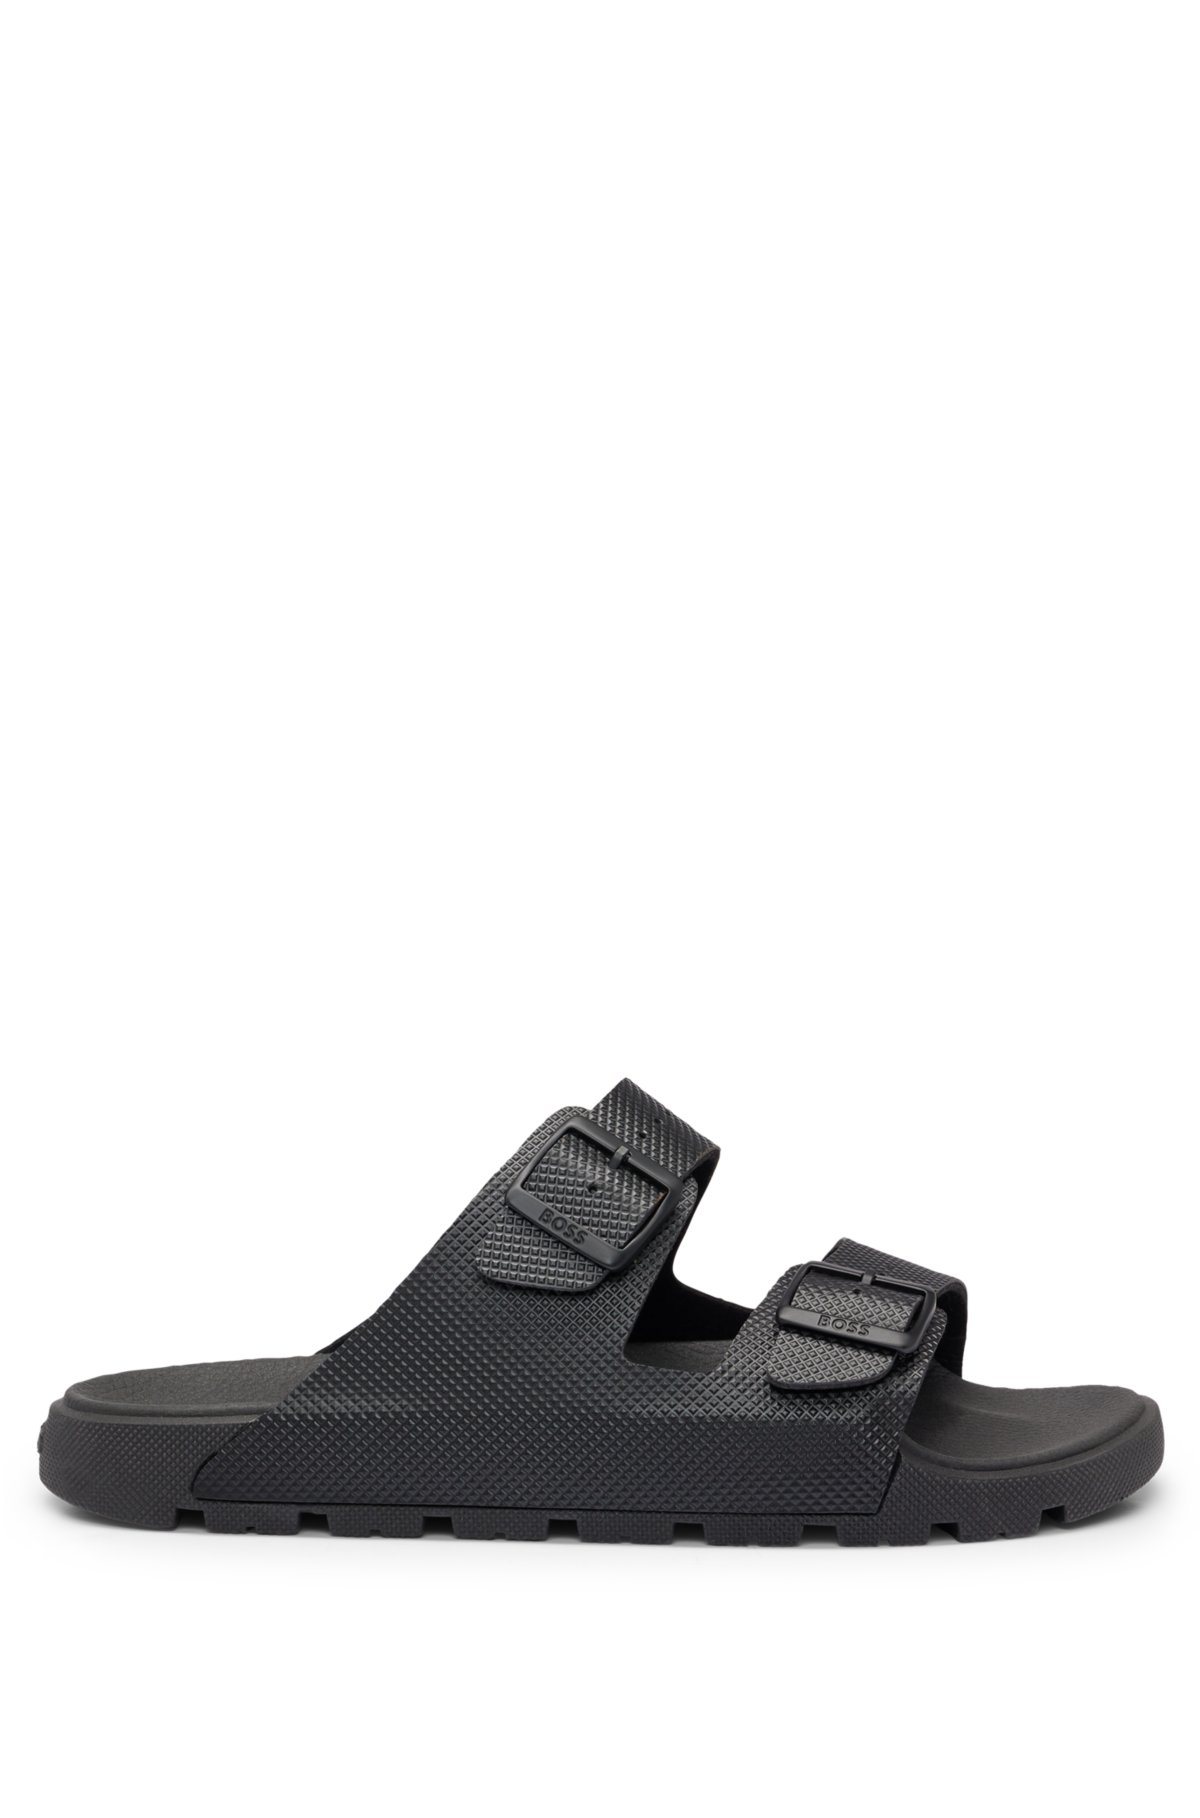 All-gender twin-strap sandals with structured uppers, Black